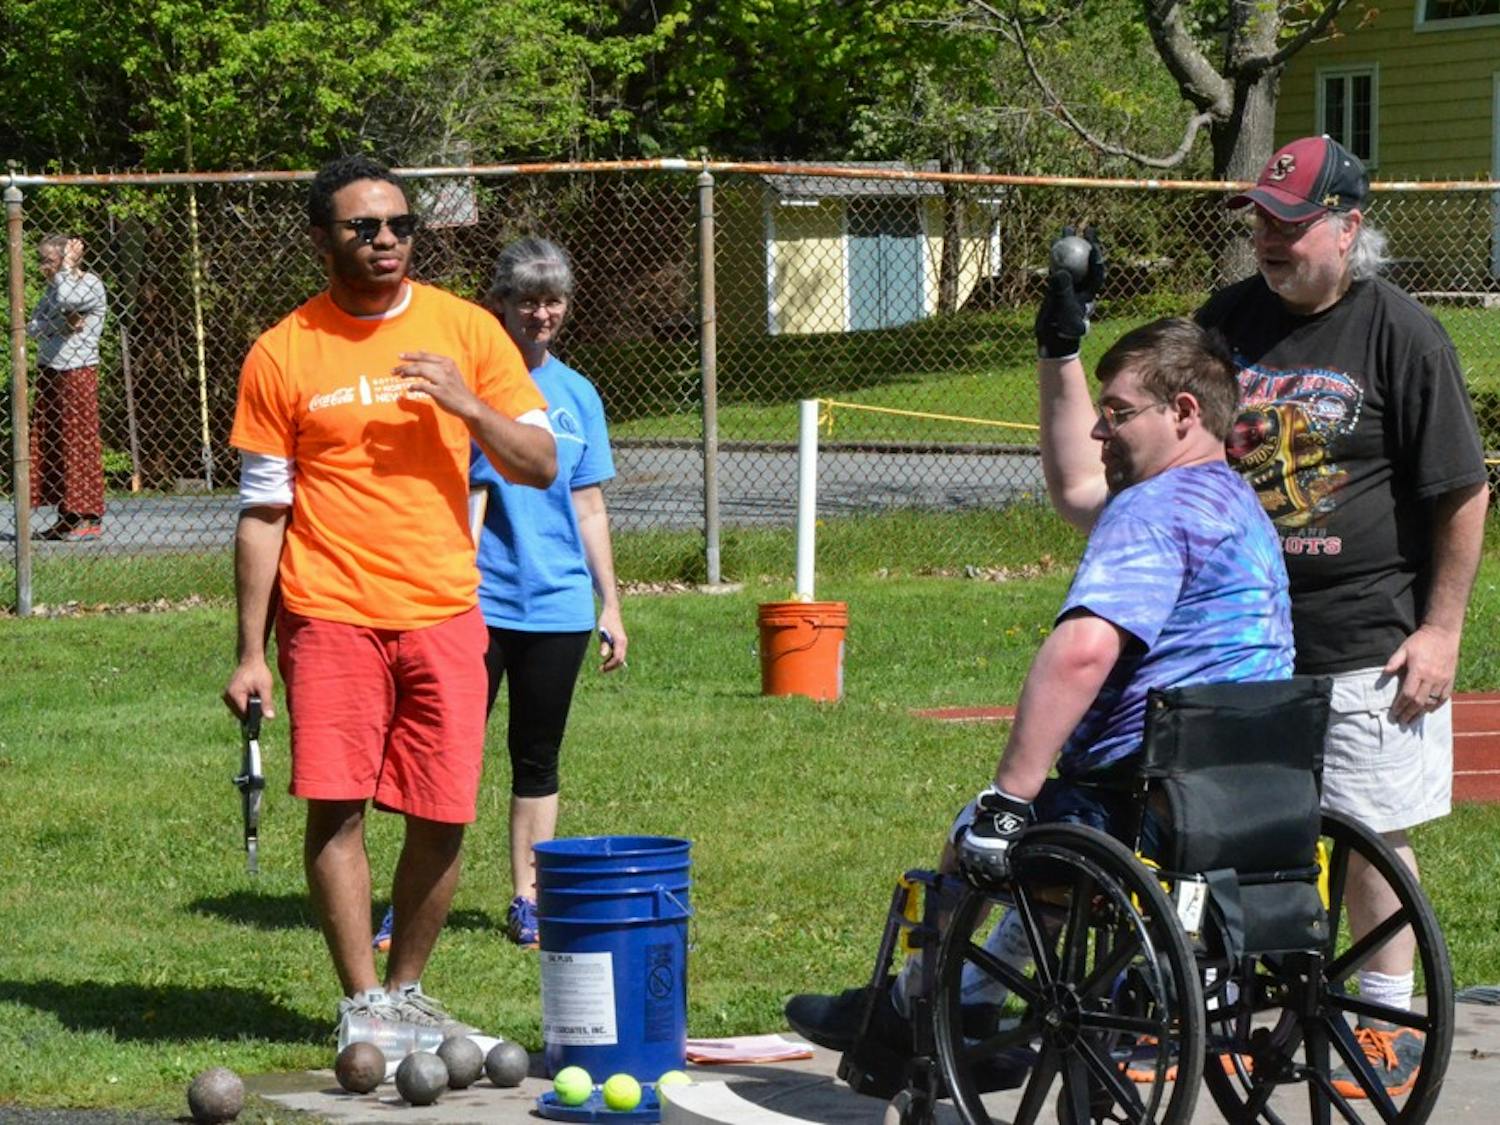 The Special Olympics took place on Saturday at Dartmouth and Hanover High School.